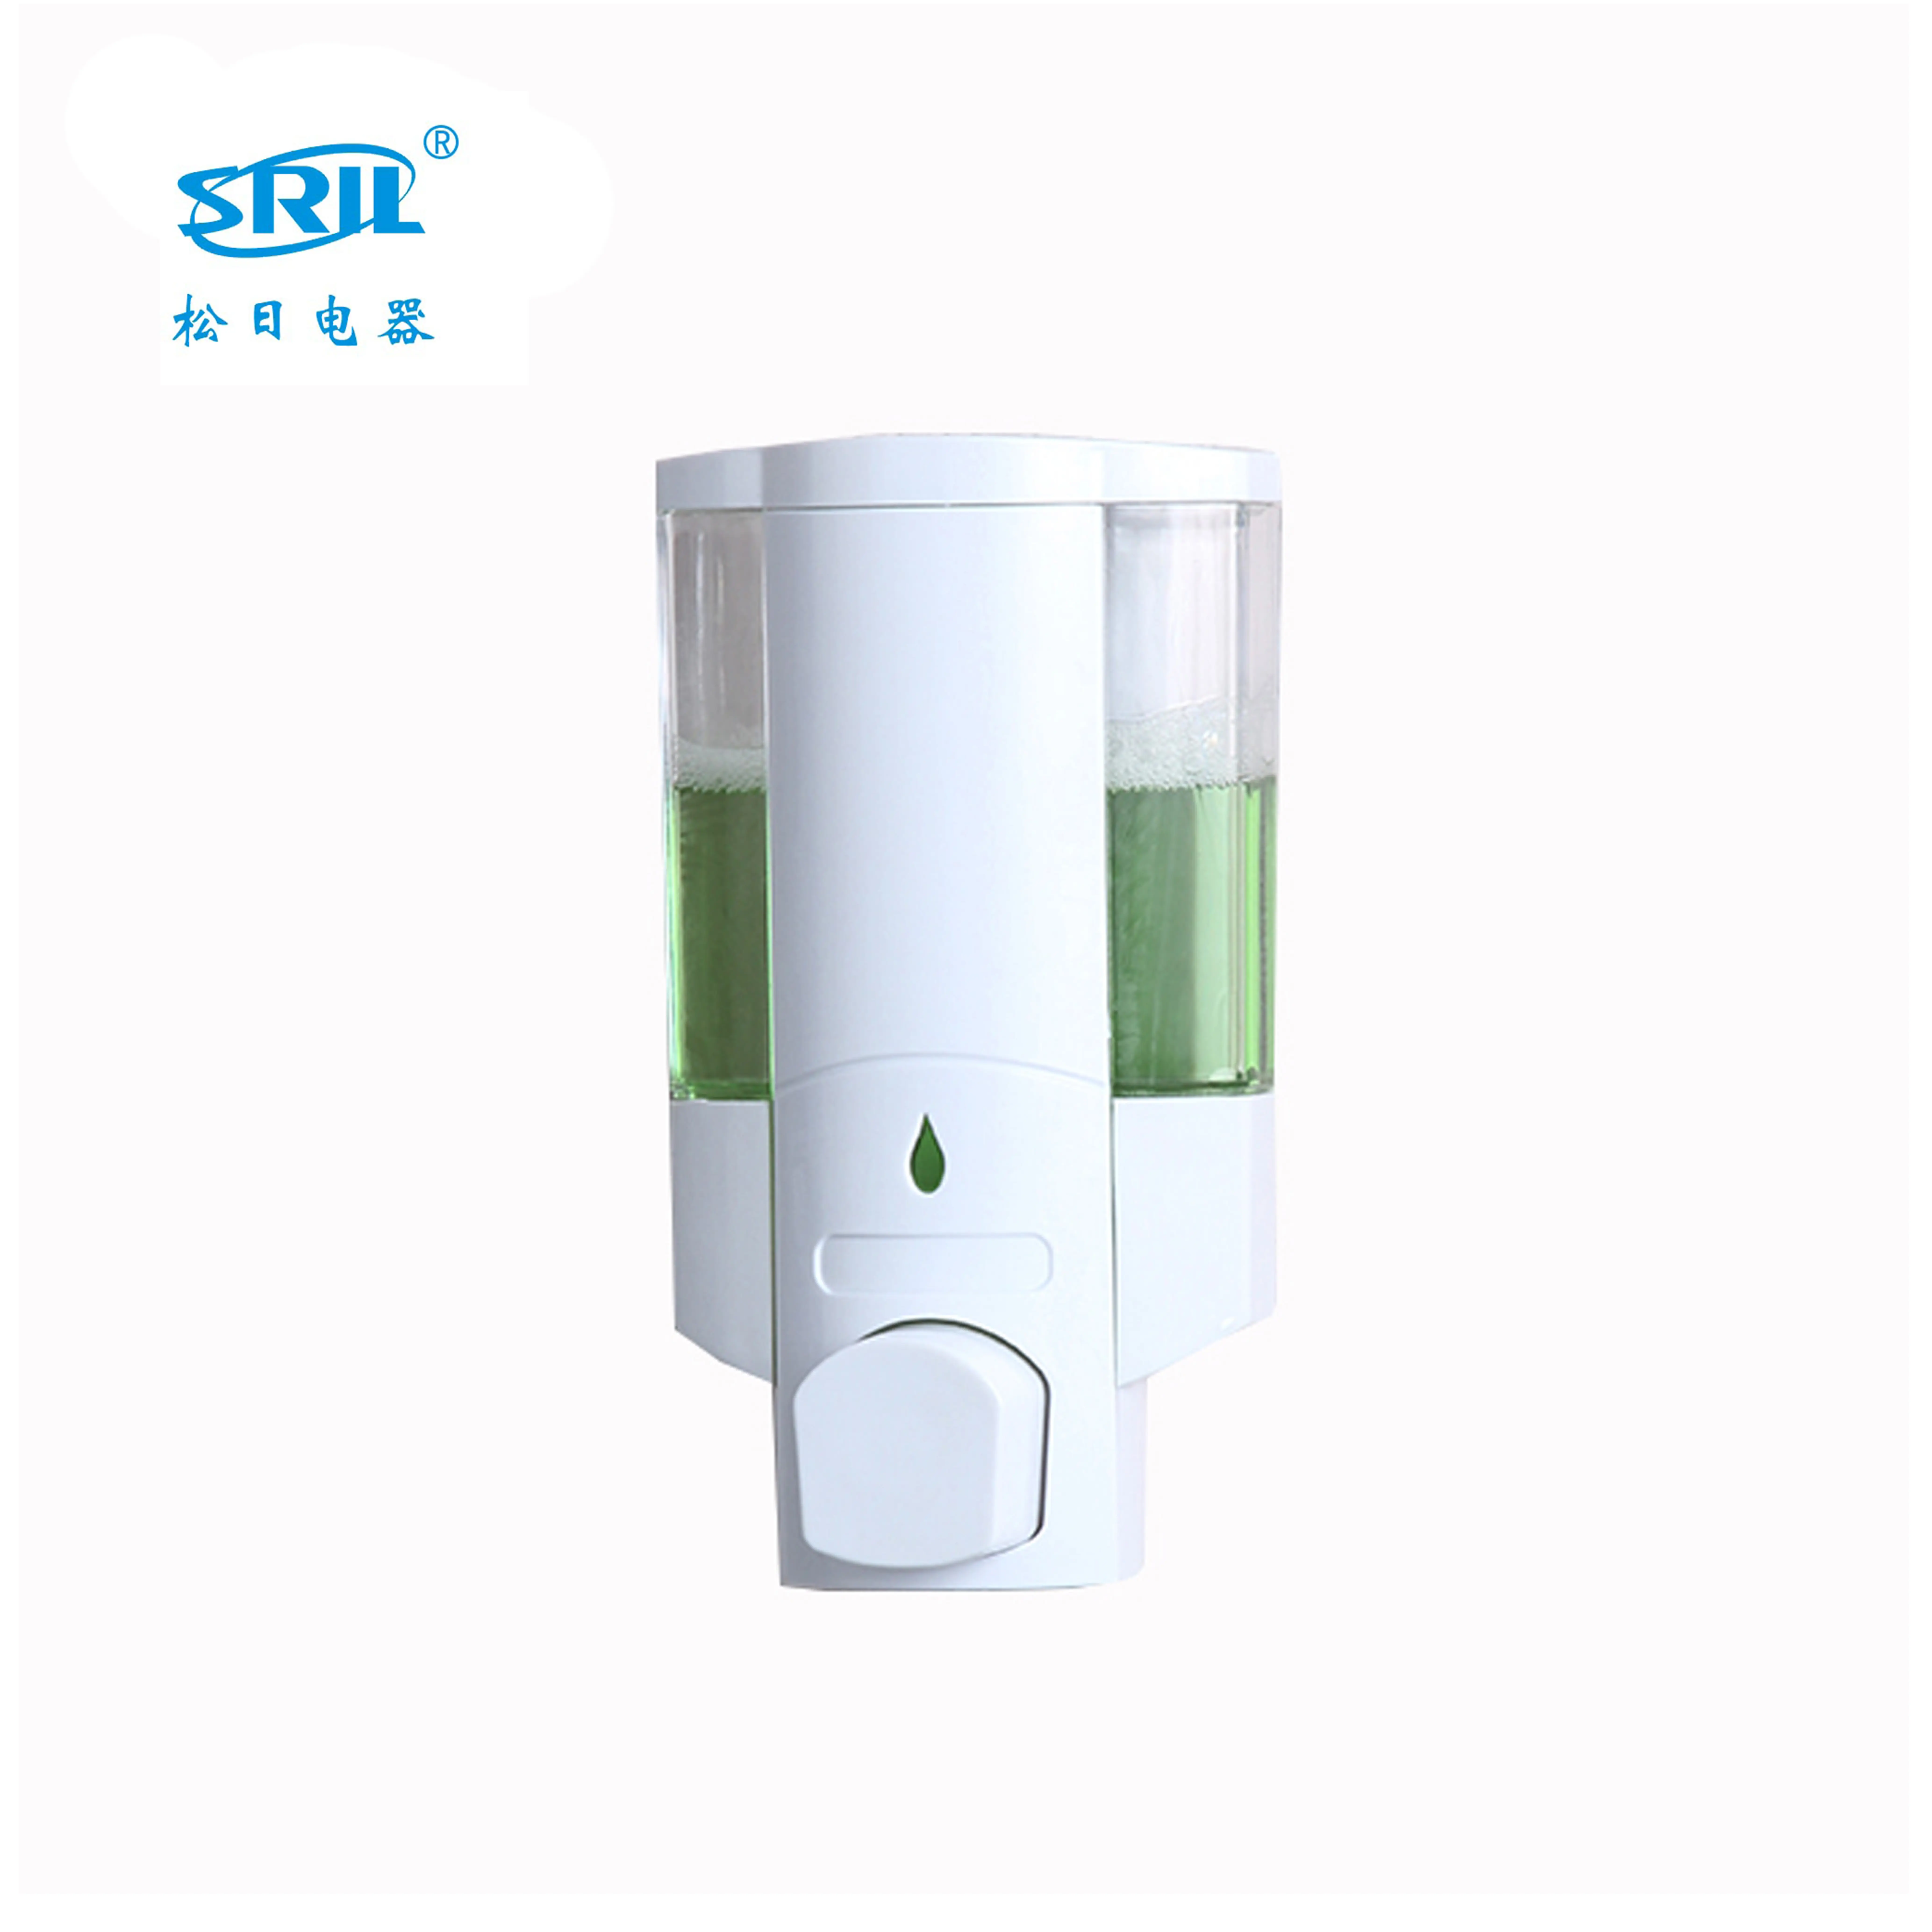 Manual Soap and Hand Sanitizer Dispenser Liquid or Gel Commerical Soap Dispenser Shampoo Shower Wall Mounted380ml